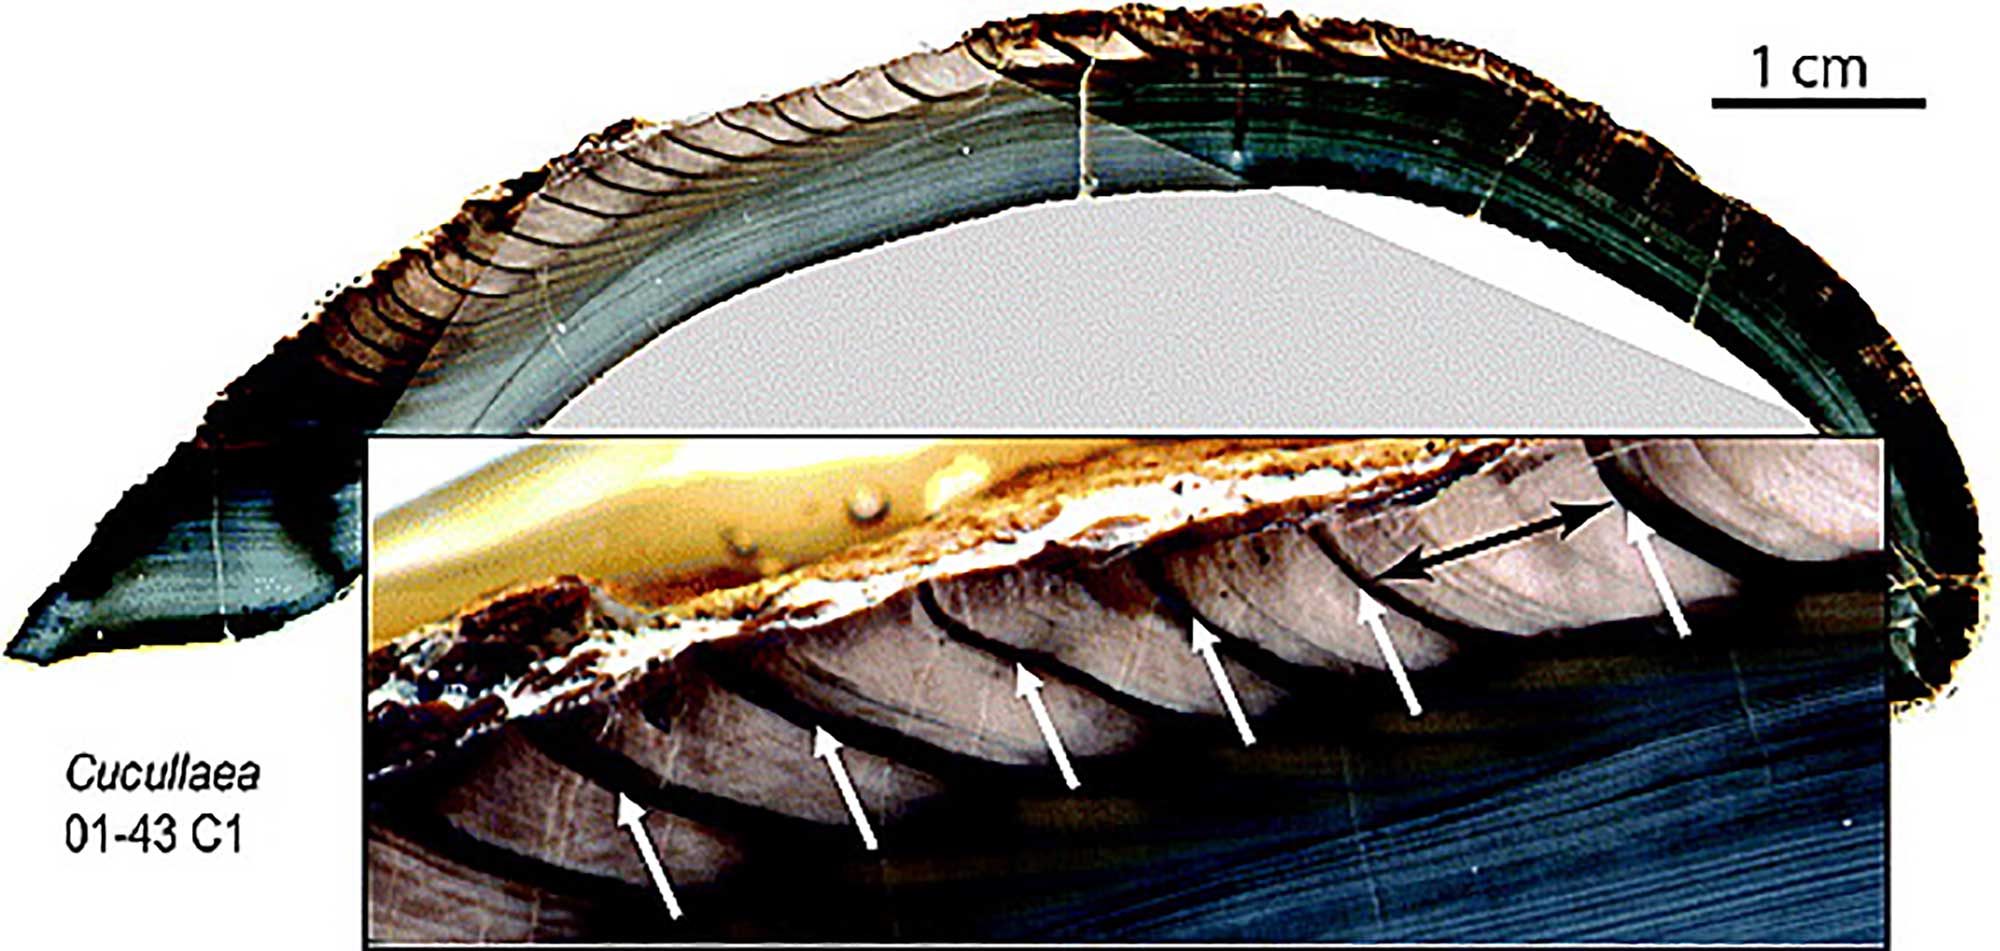 Image showing a cross-section through the shell of a clam, illustrating annual growth bands.